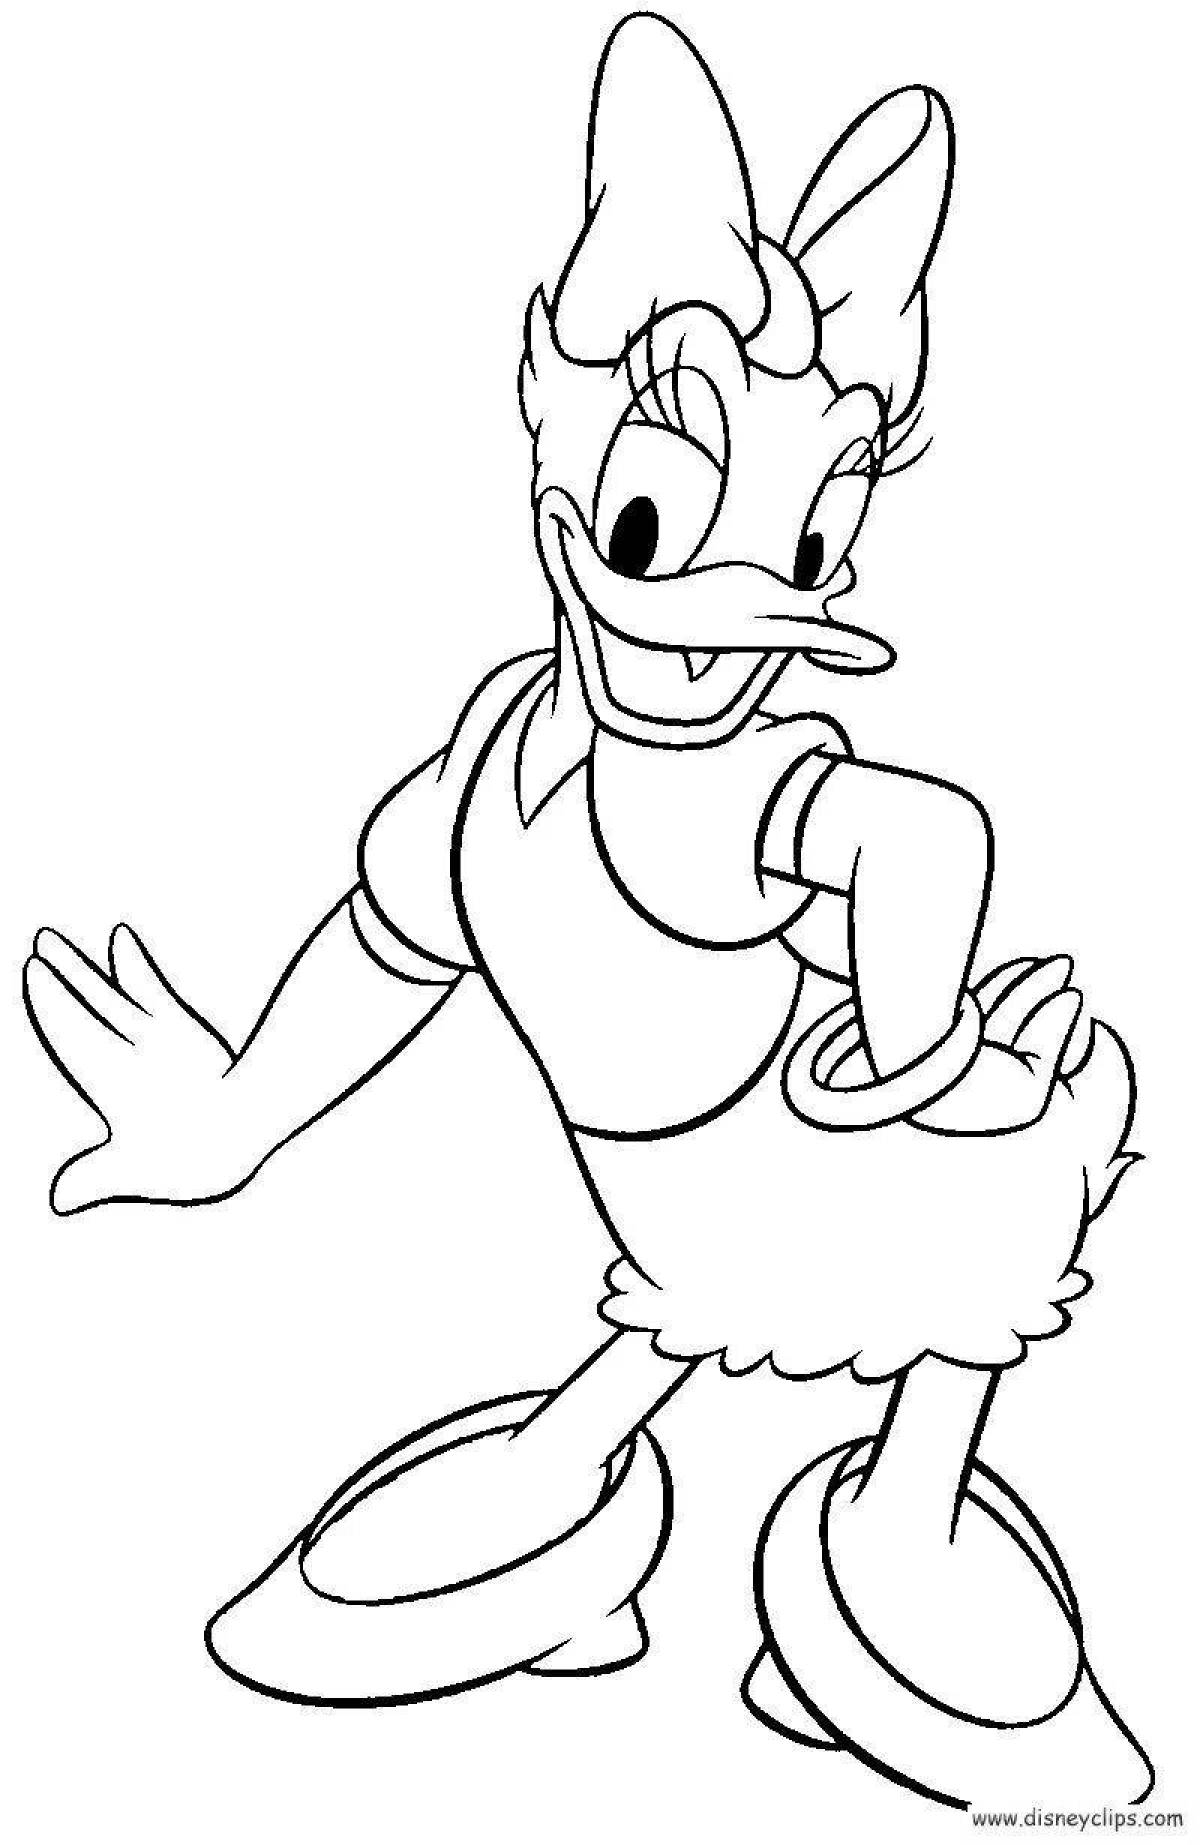 Playful ooty coloring page